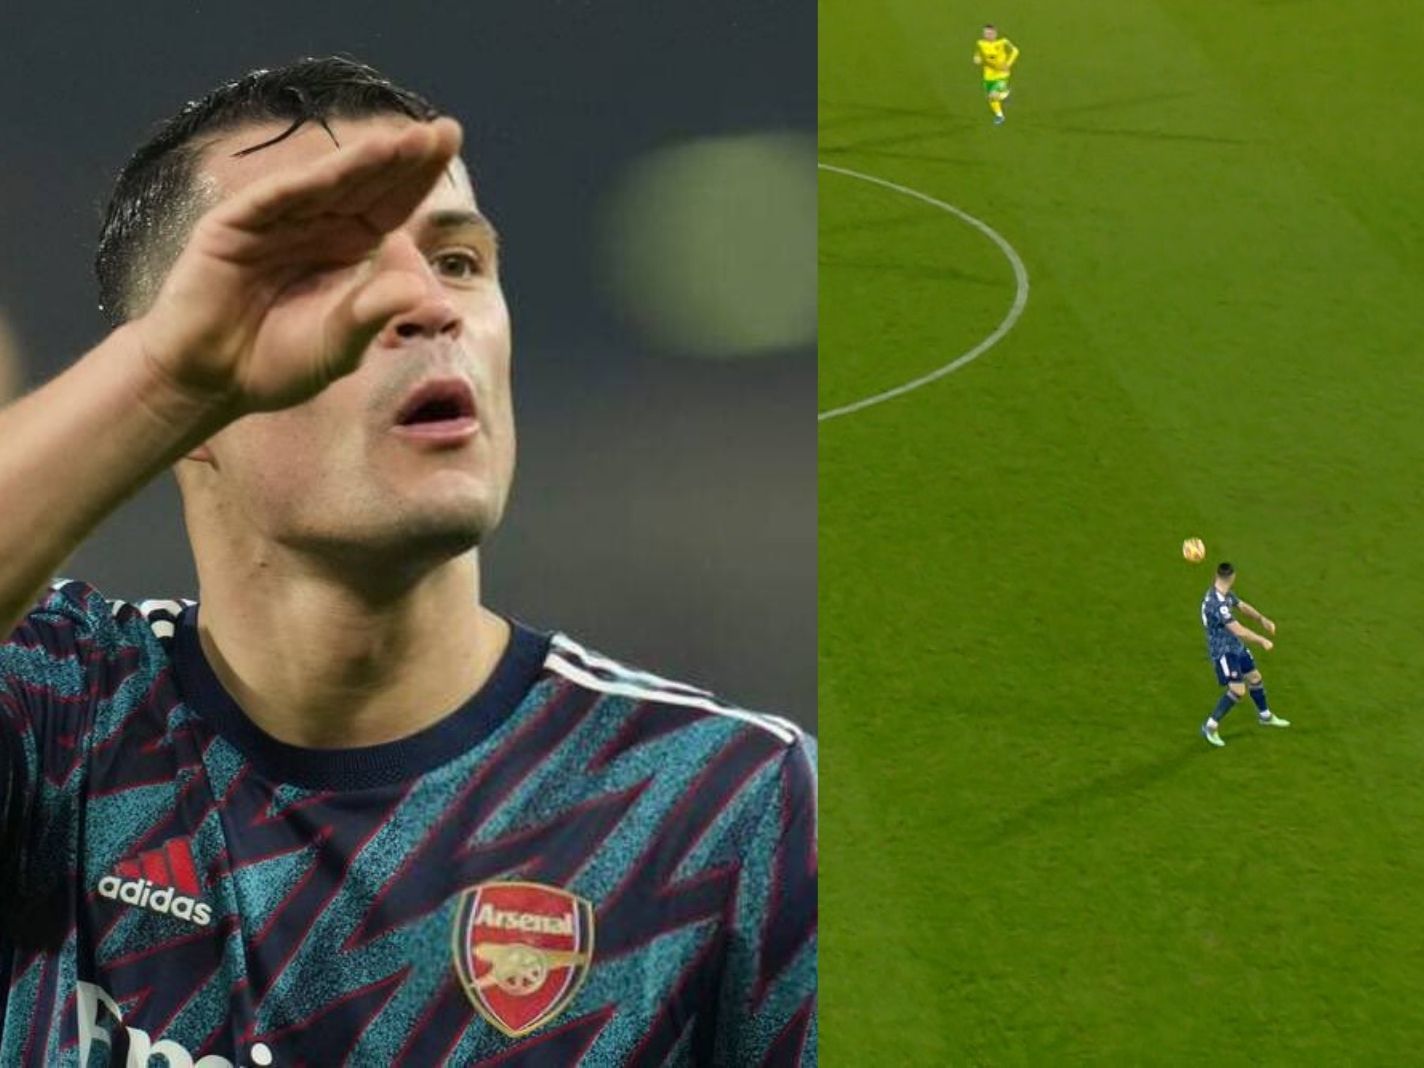 Twitter reacts to Granit Xhaka ballplaying with his back